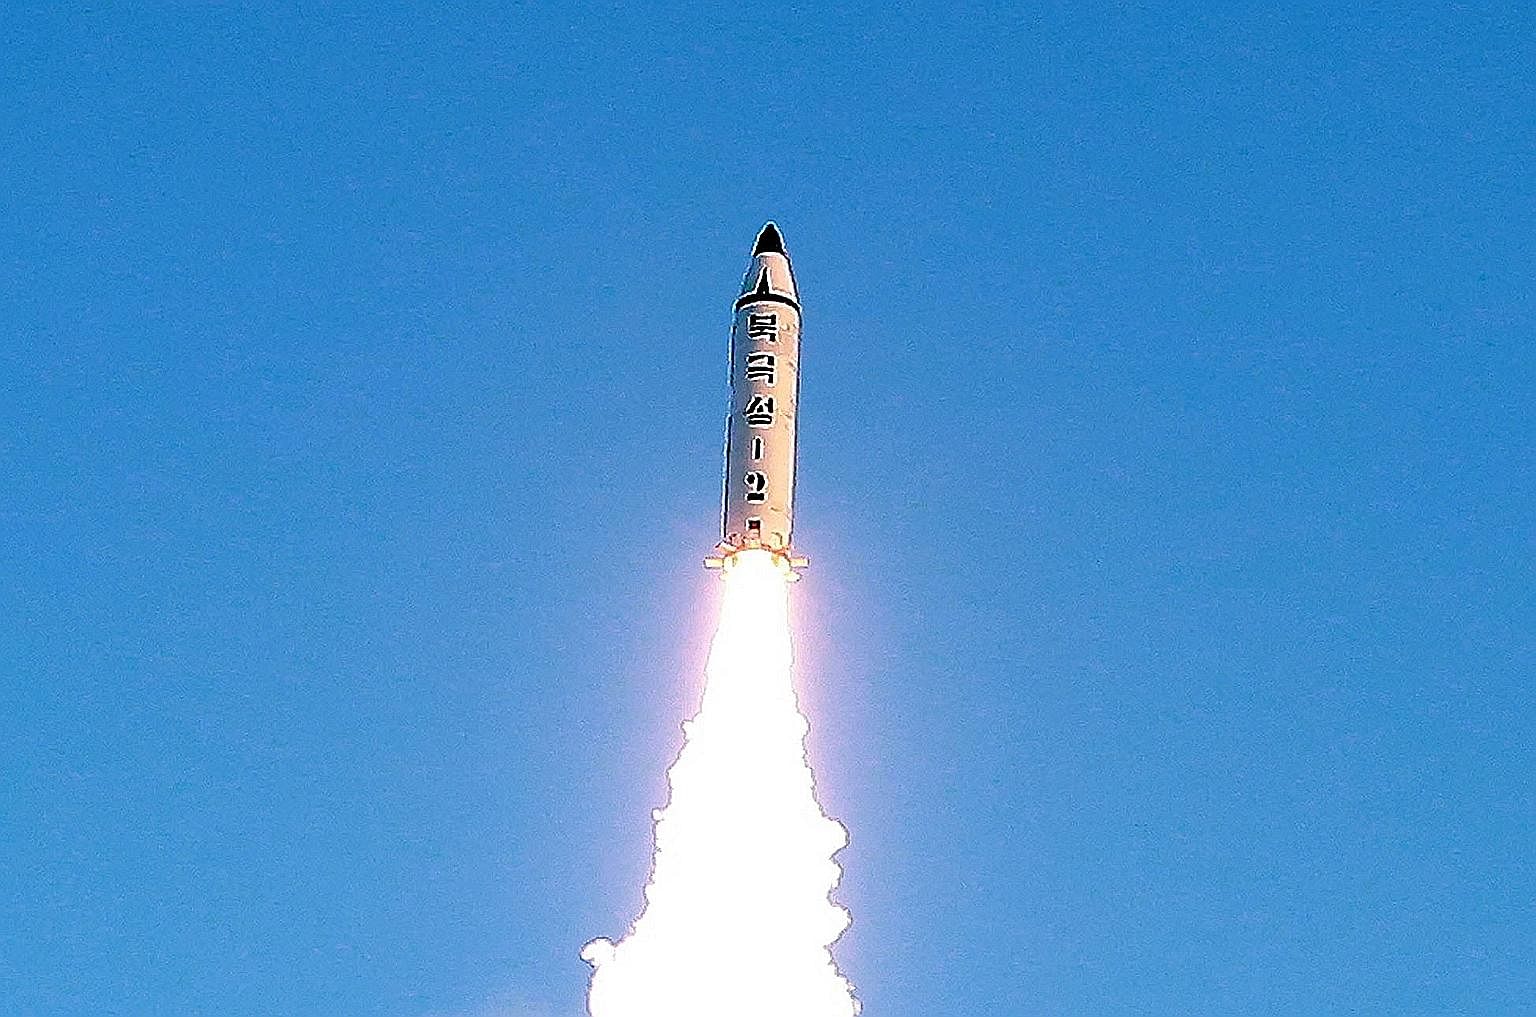 Earlier this month, North Korea tested a new ballistic missile.